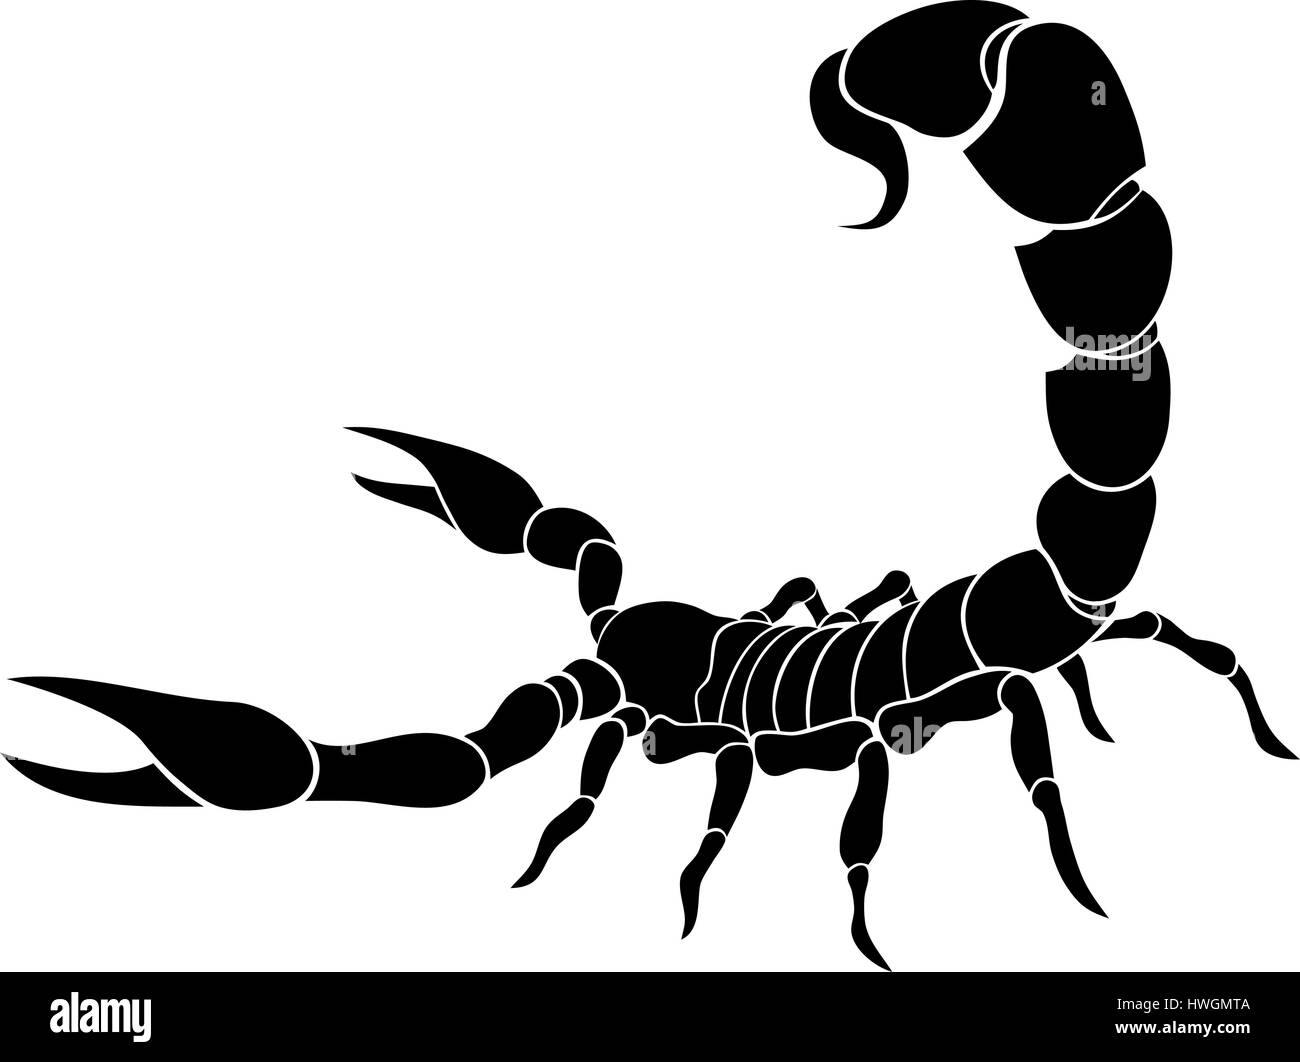 Abstract vector illustration of scorpion on white bacground Stock Vector